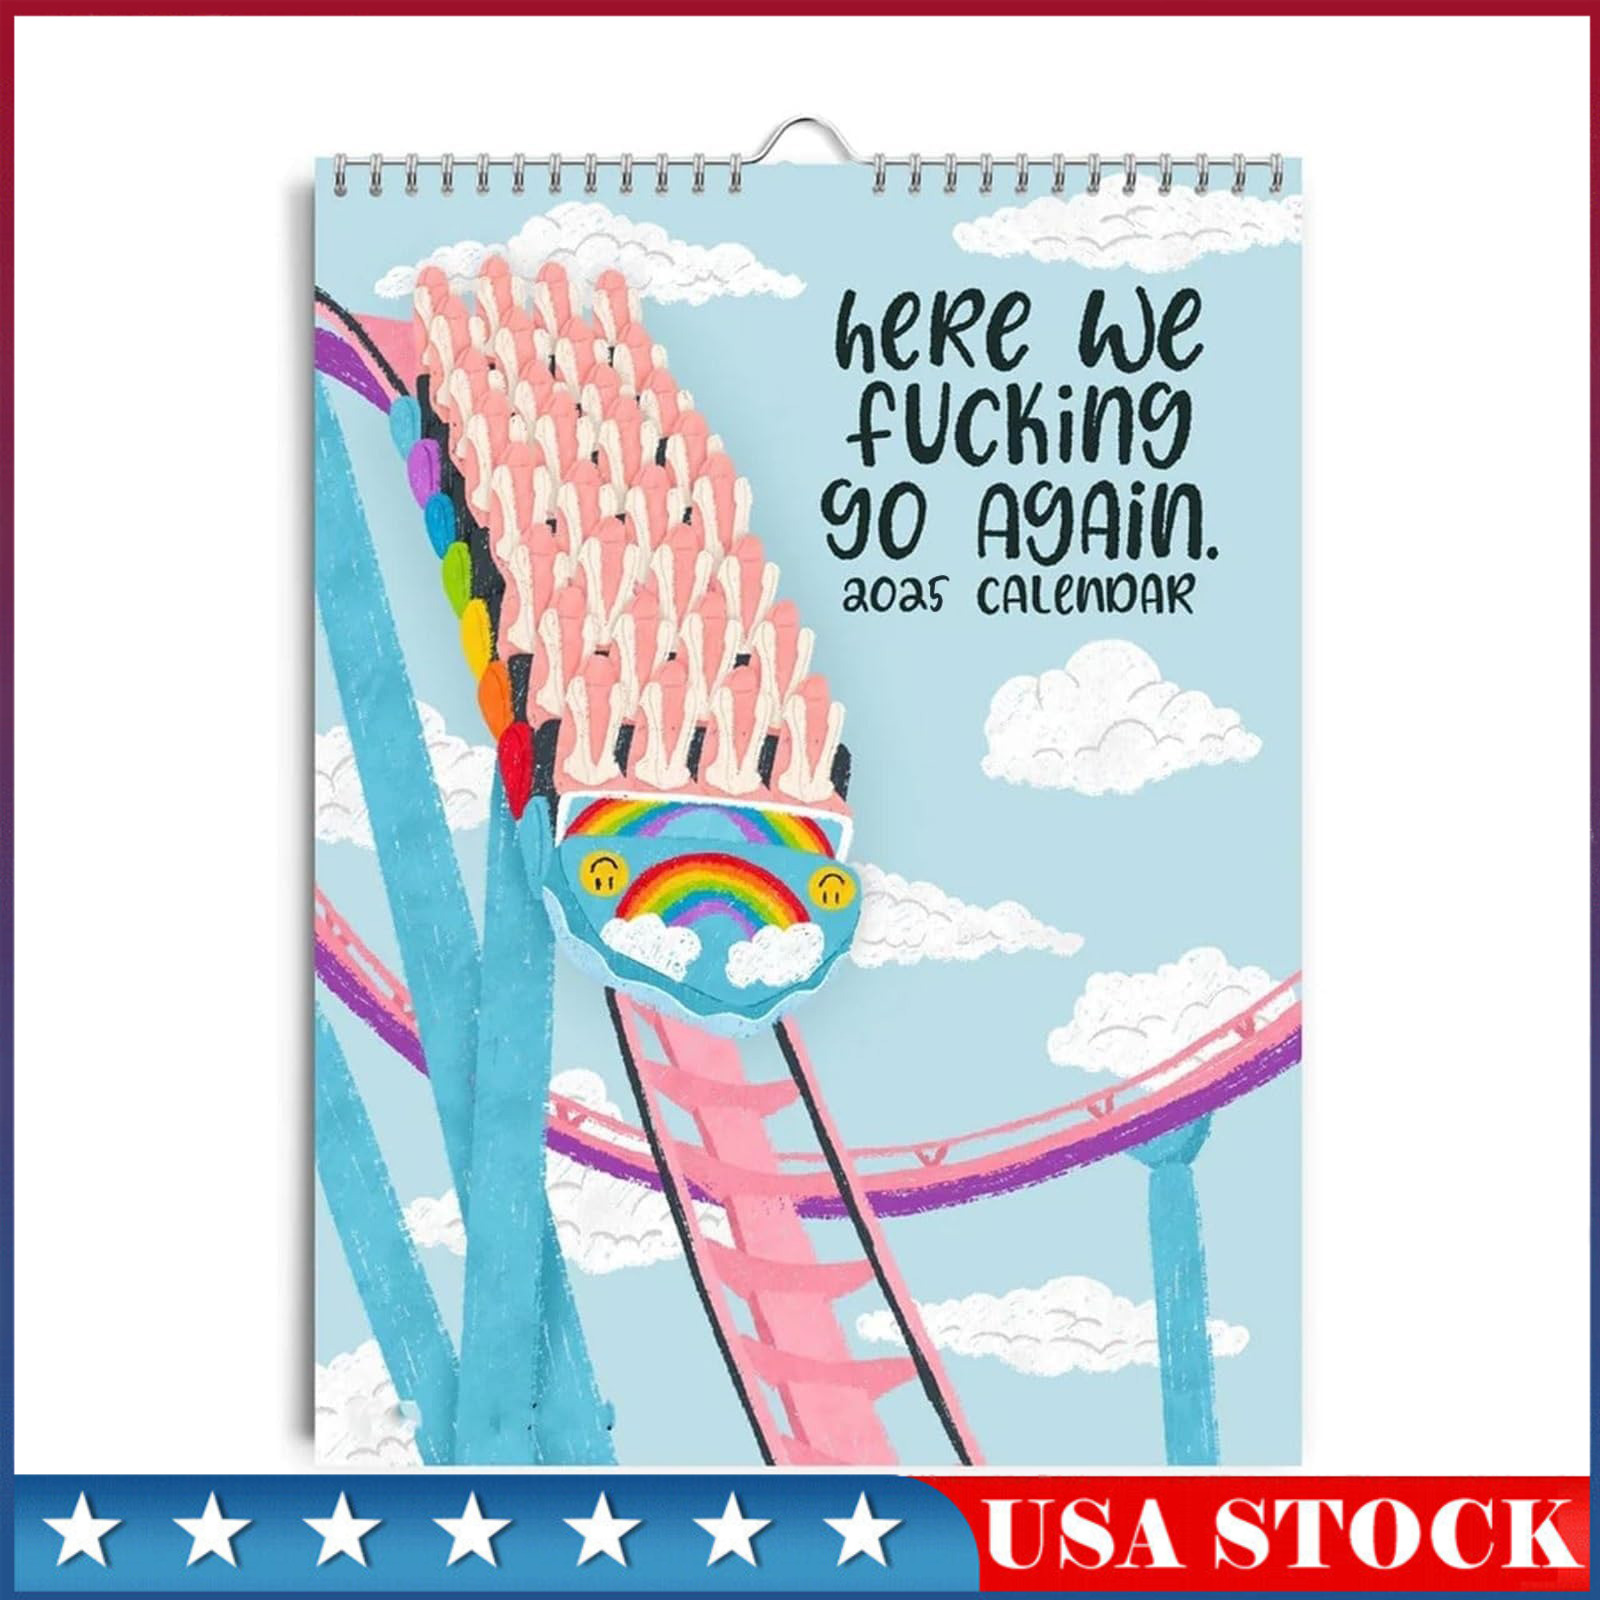 Here We F ucking Go Again 2025 Calendar,Hanging Monthly Calendar for Home Office